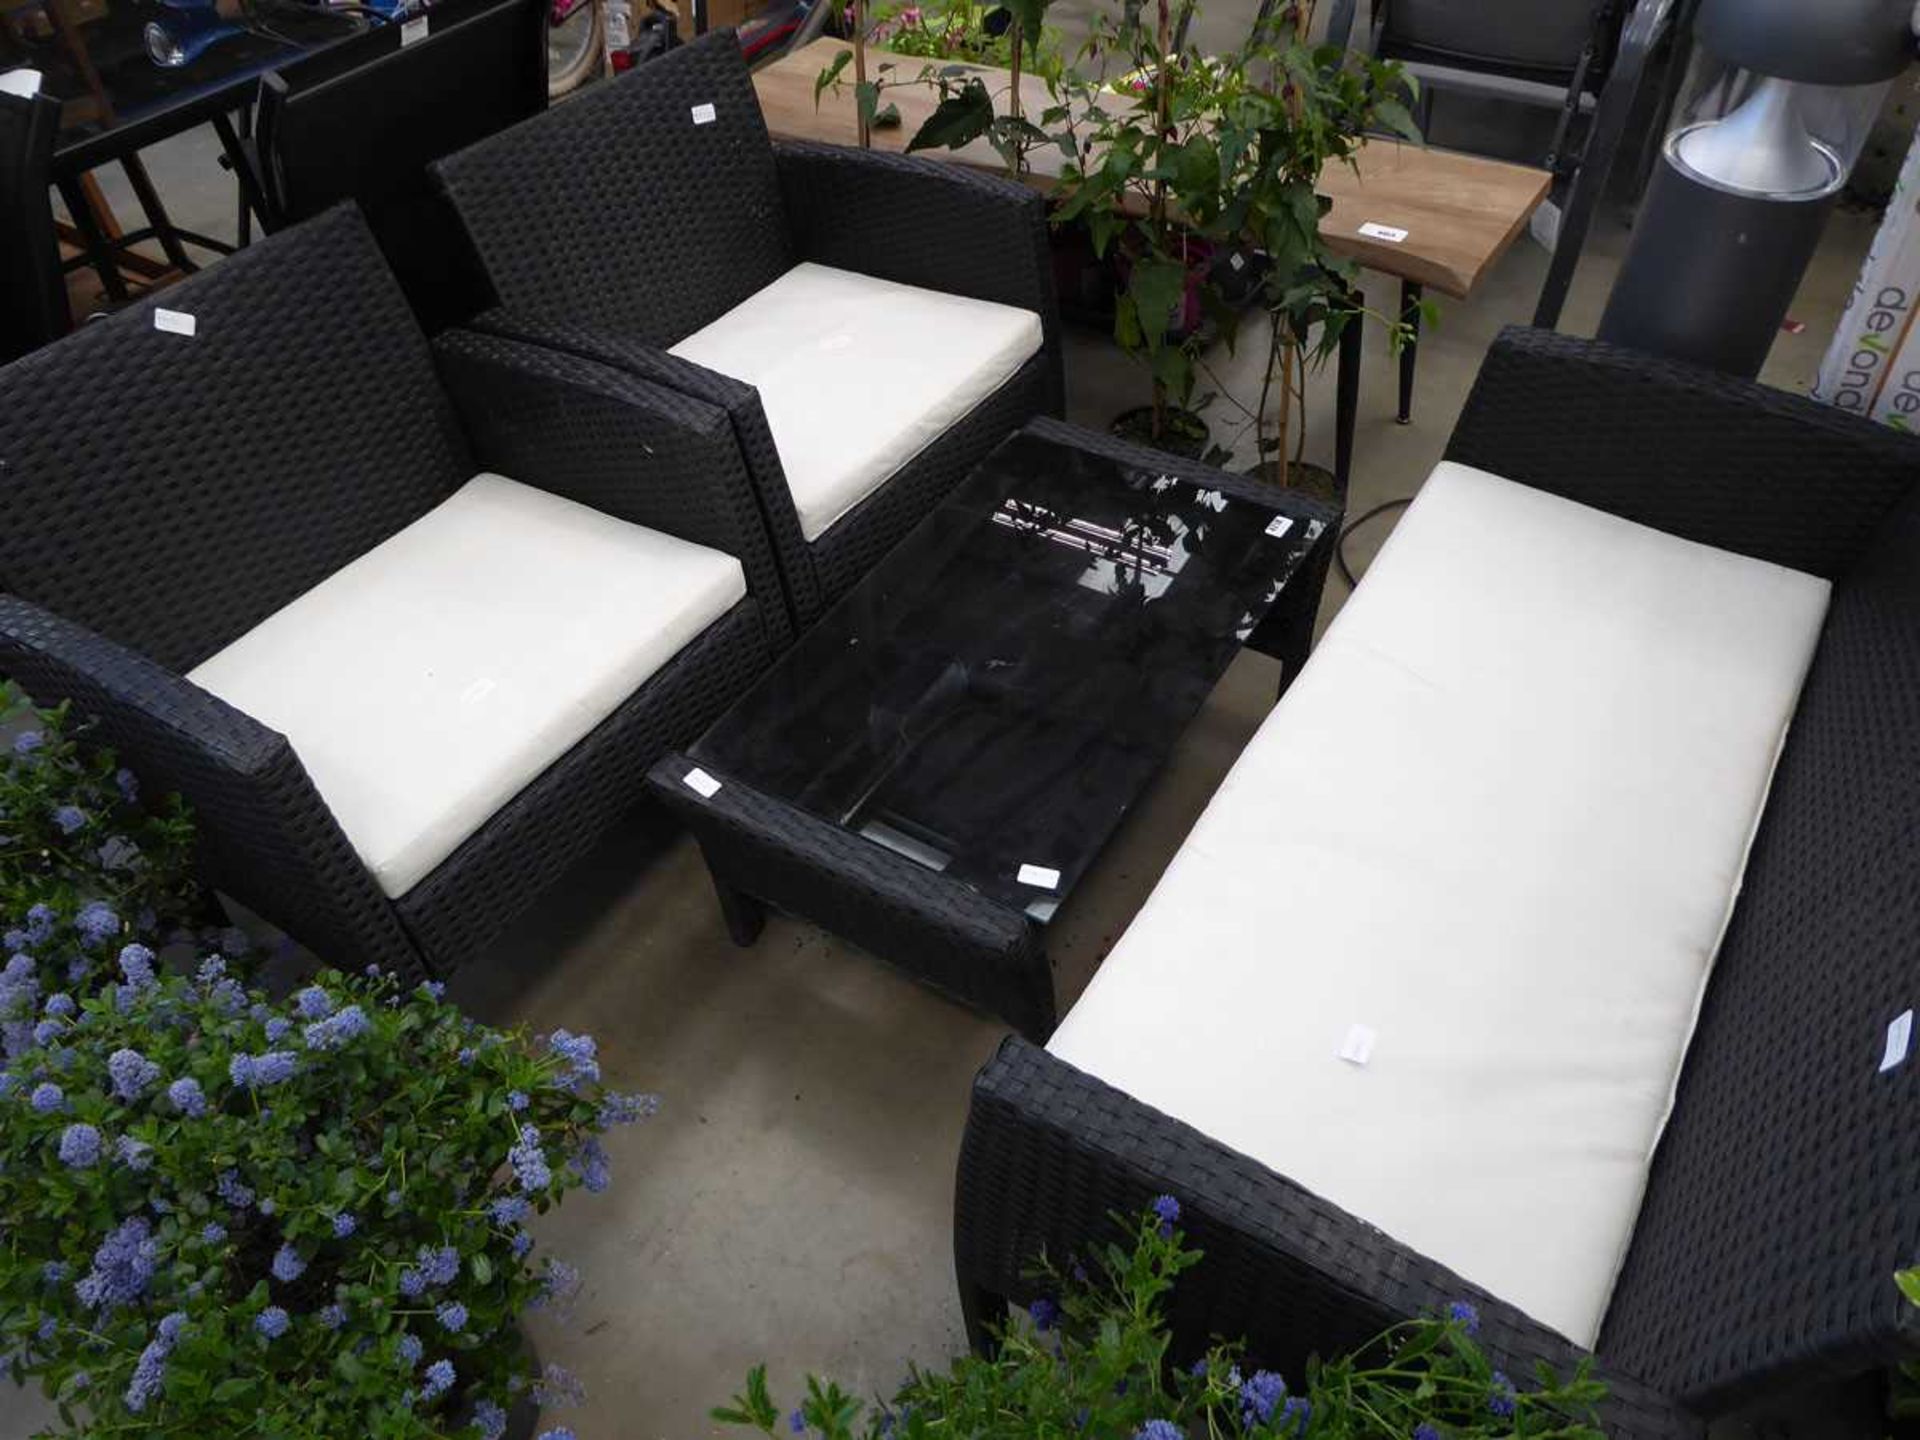 4 piece garden rattan set consisting of 2 seater sofa, 2 chairs and glass top coffee table